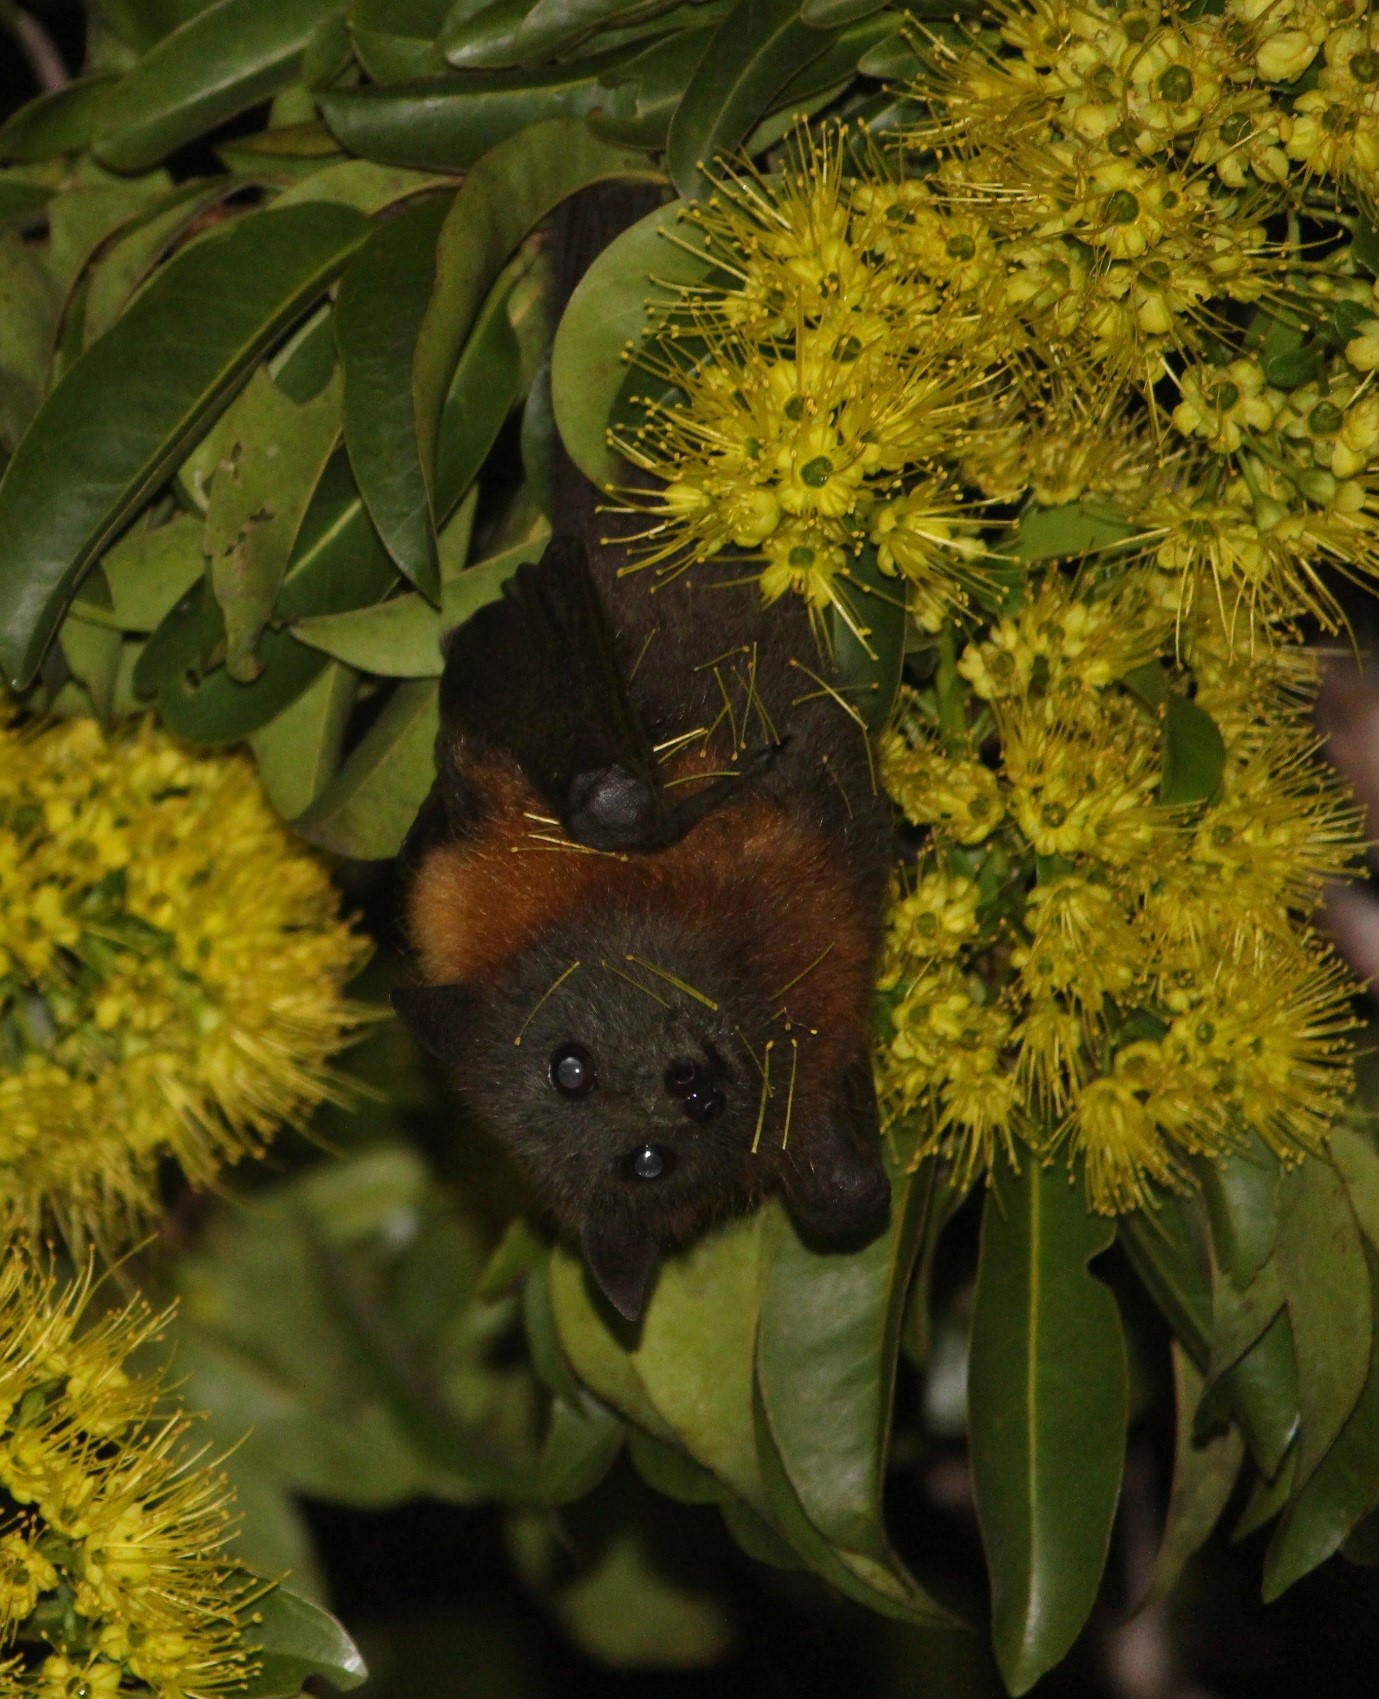 How do flying-foxes respond to high temperatures